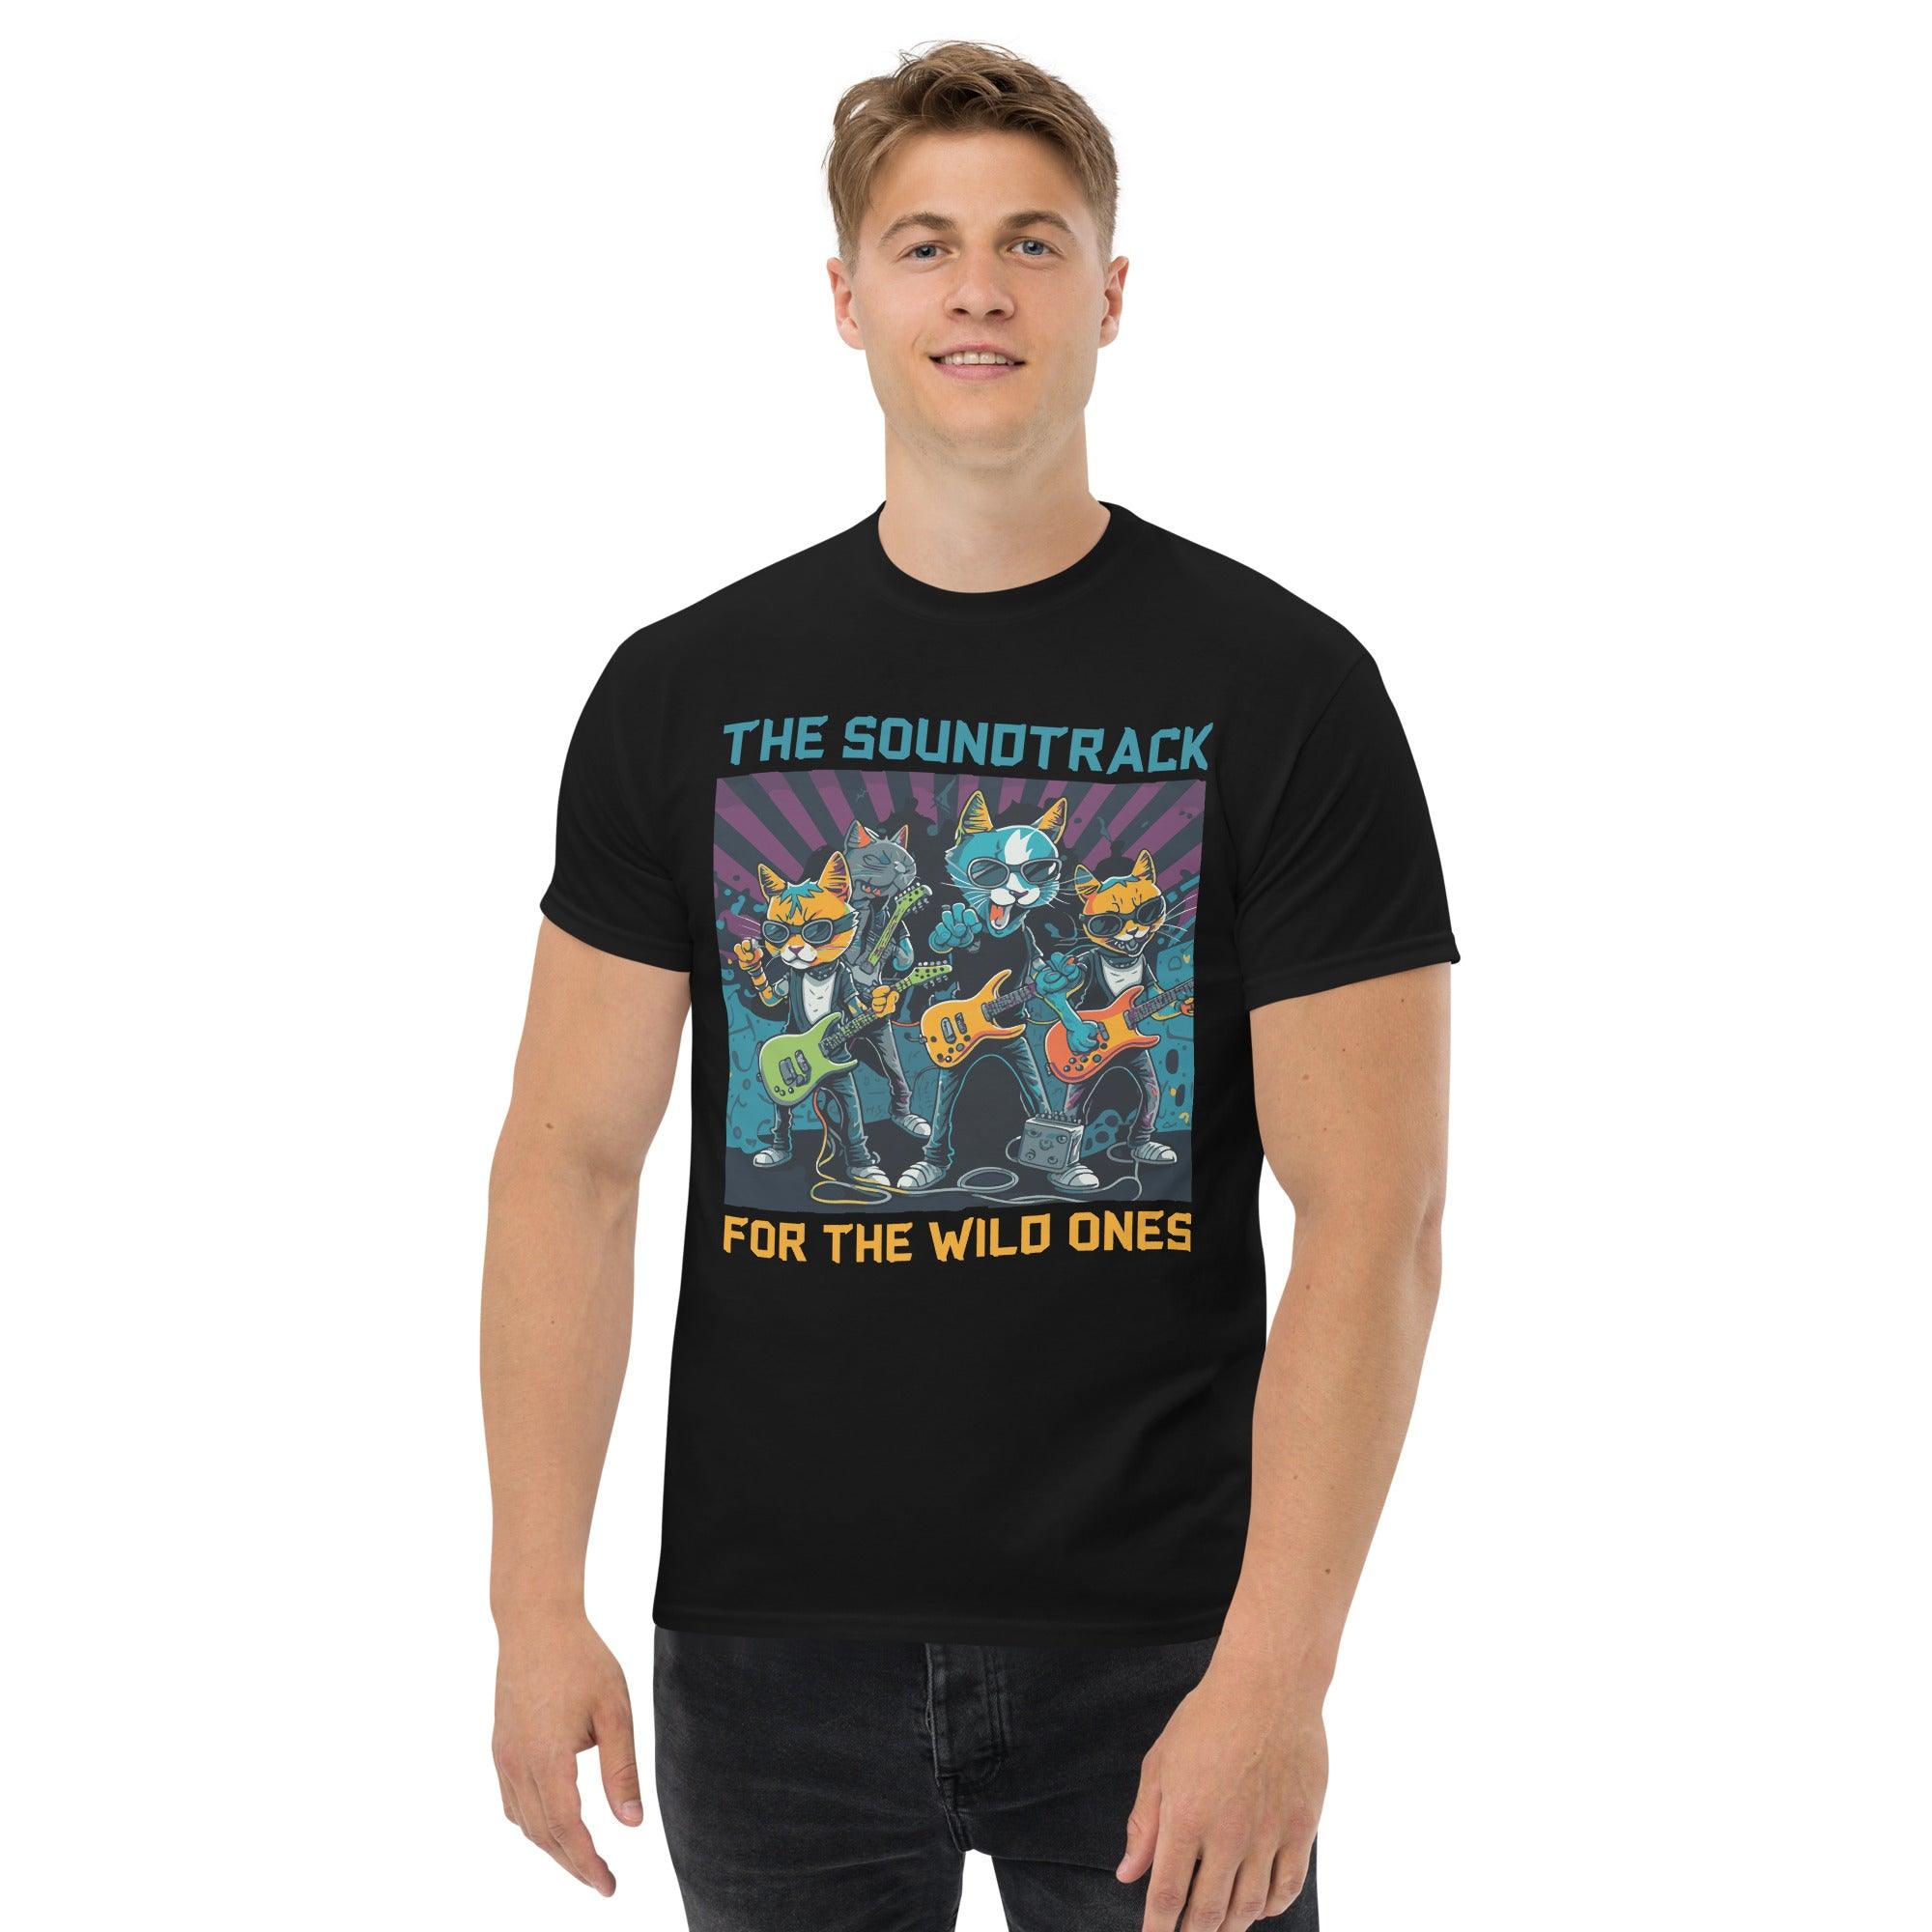 The wild ones men's classic tee - Beyond T-shirts